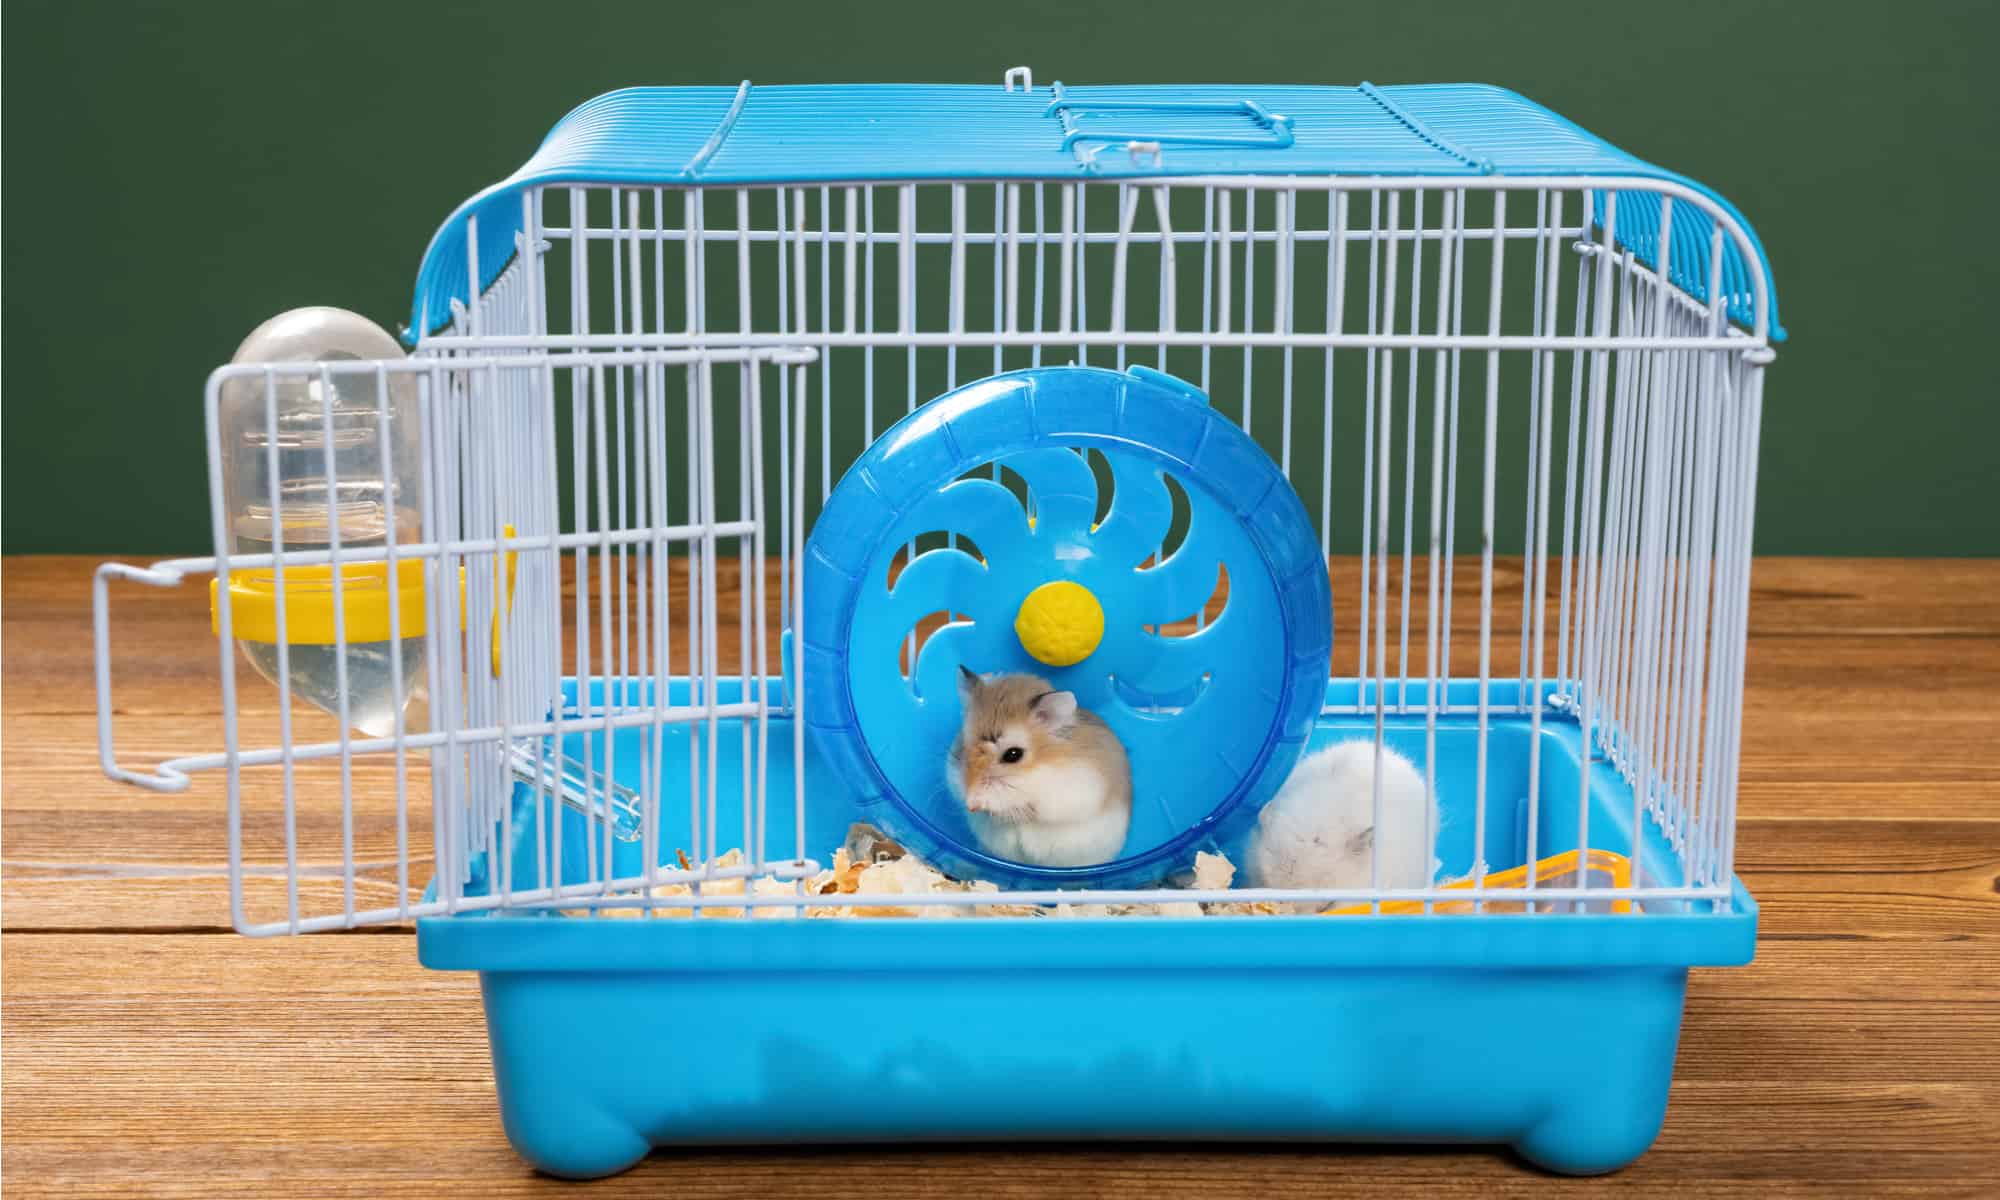 8. Ventilation issues to consider with plastic hamster habitats